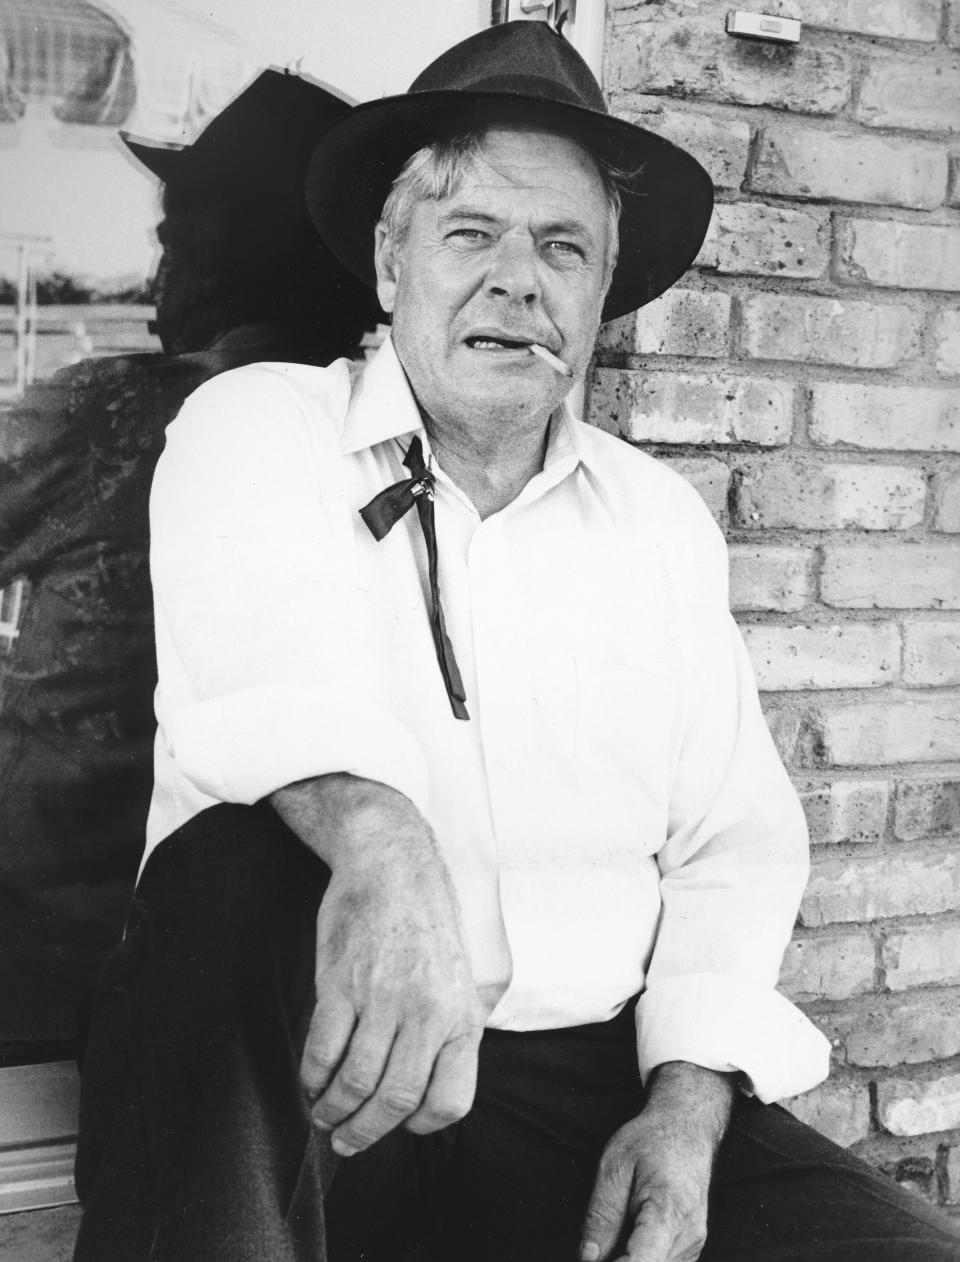 A 1980 file photo provided by CBS shows actor William Windom, who won an Emmy Award for his turn in the TV comedy series "My World And Welcome To It," died Aug. 16, 2012, of congestive heart failure at his home in Woodacre, north of San Francisco. He was 88.